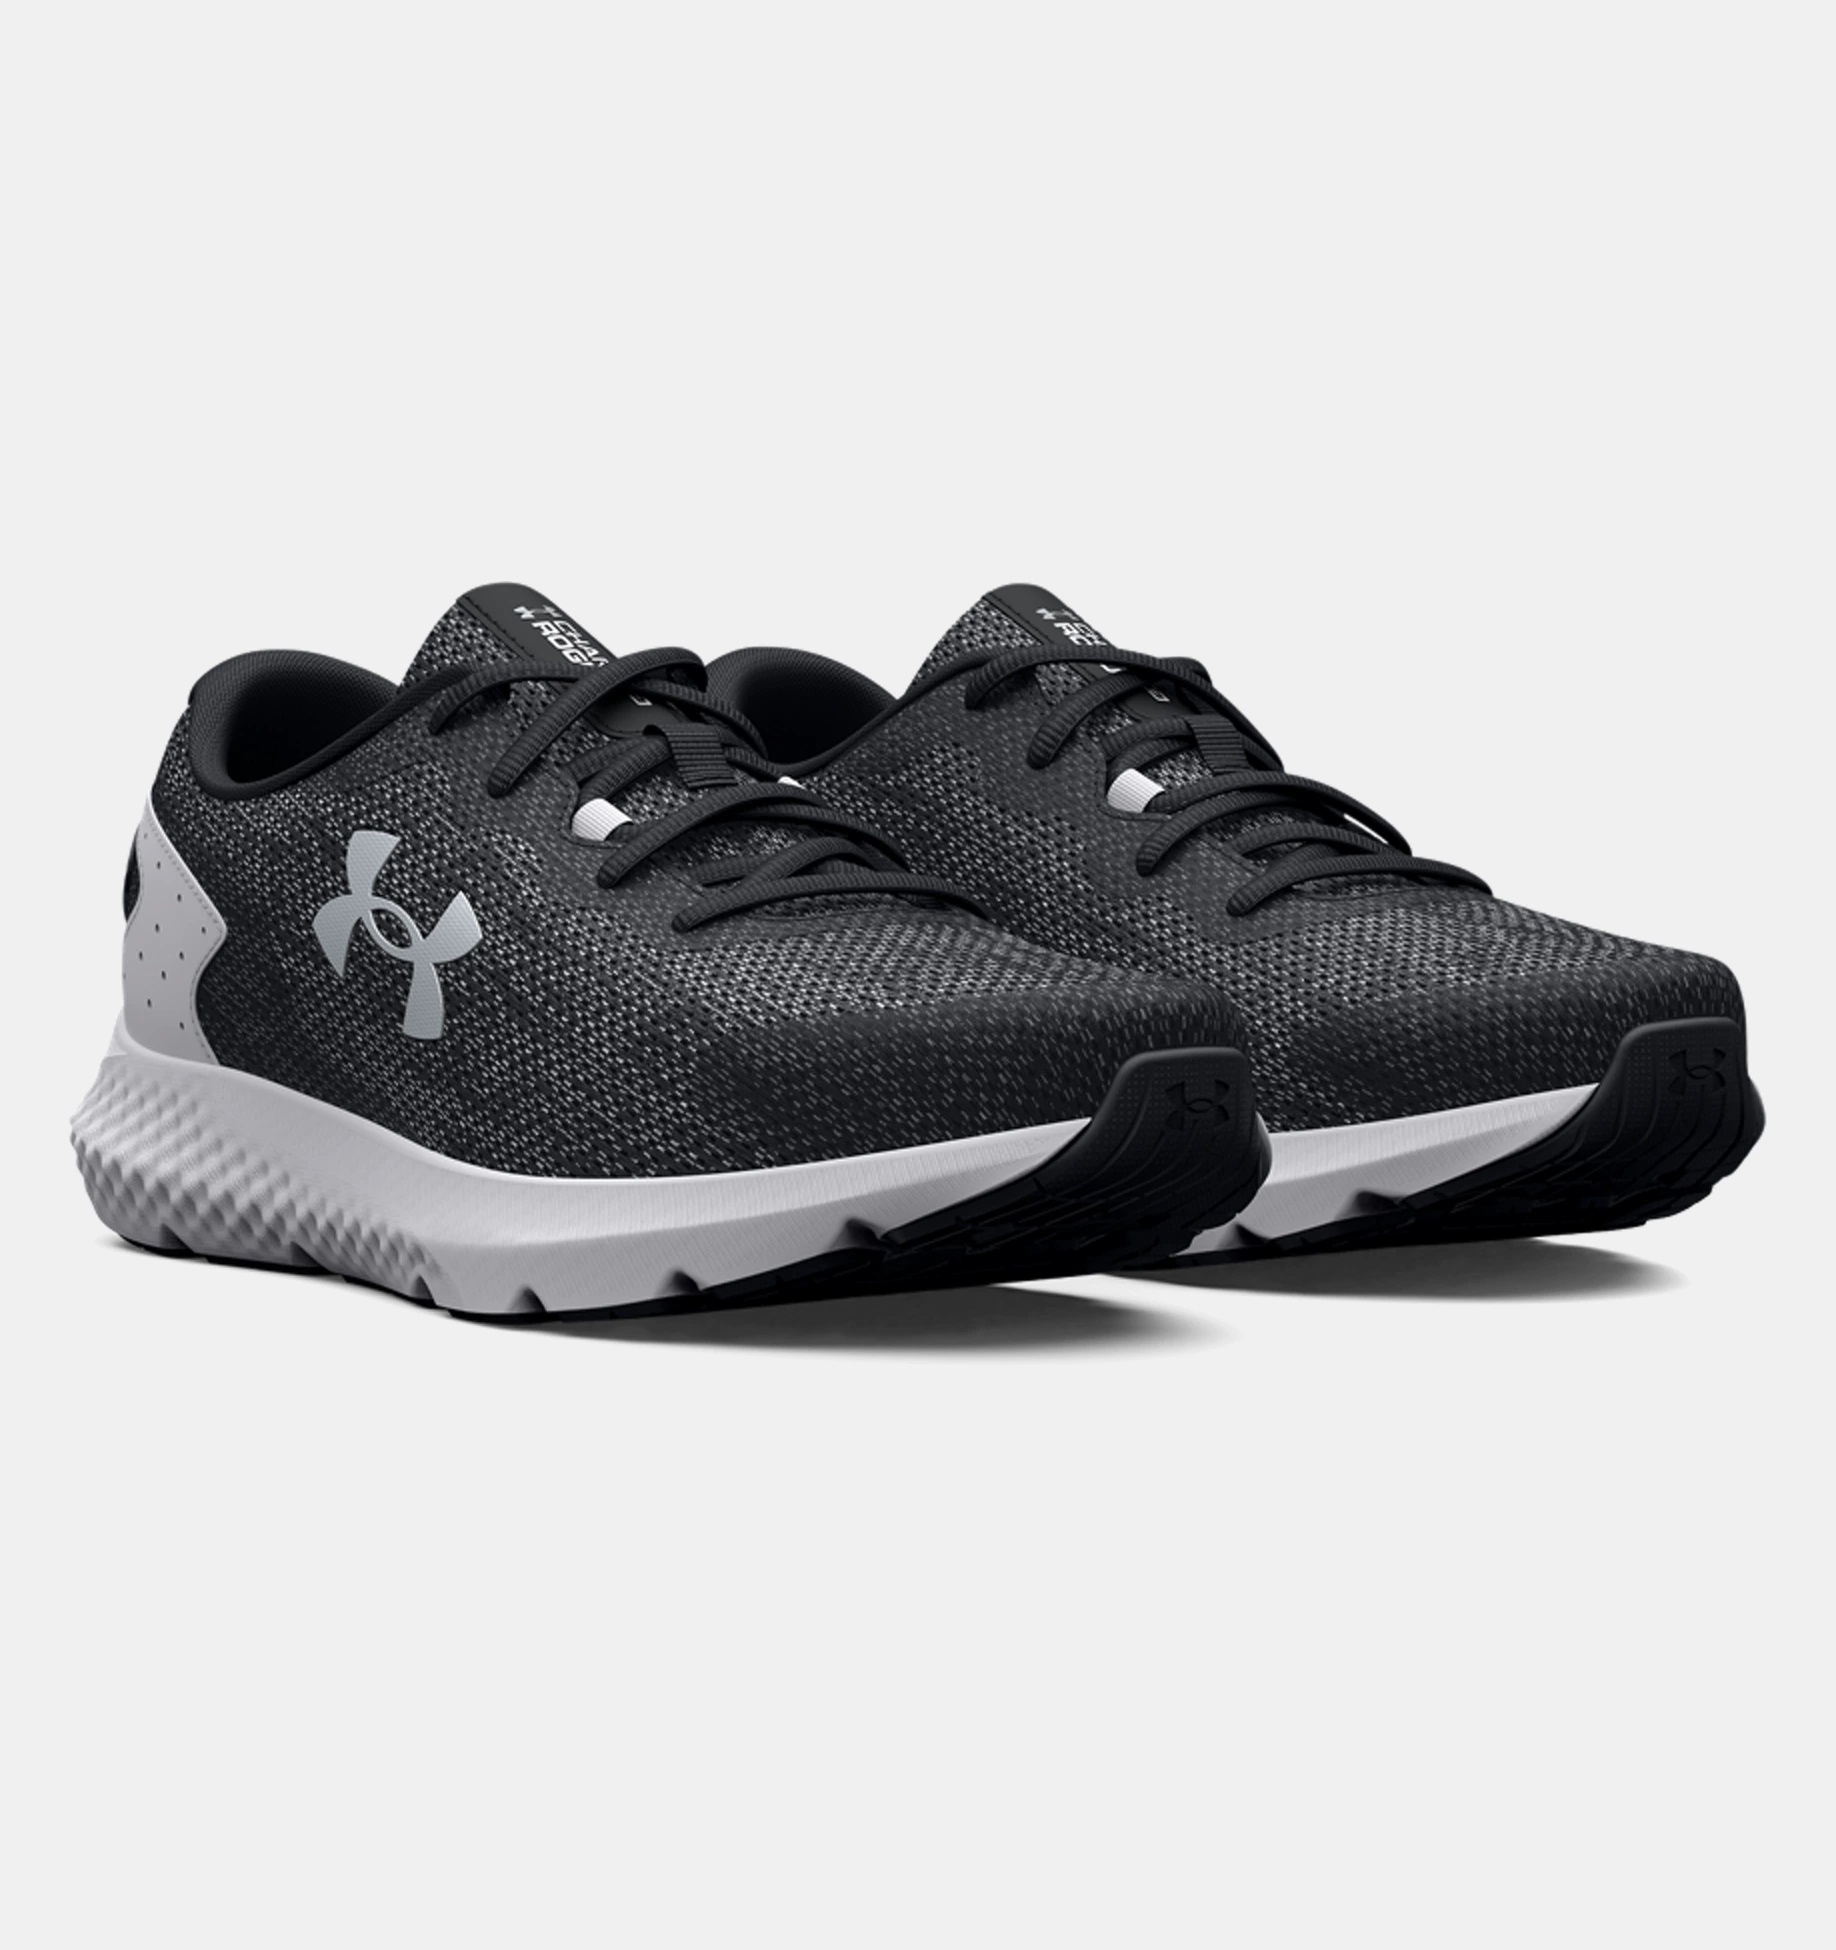 UNDER ARMOUR Charged Rogue 3 Knit - Herren